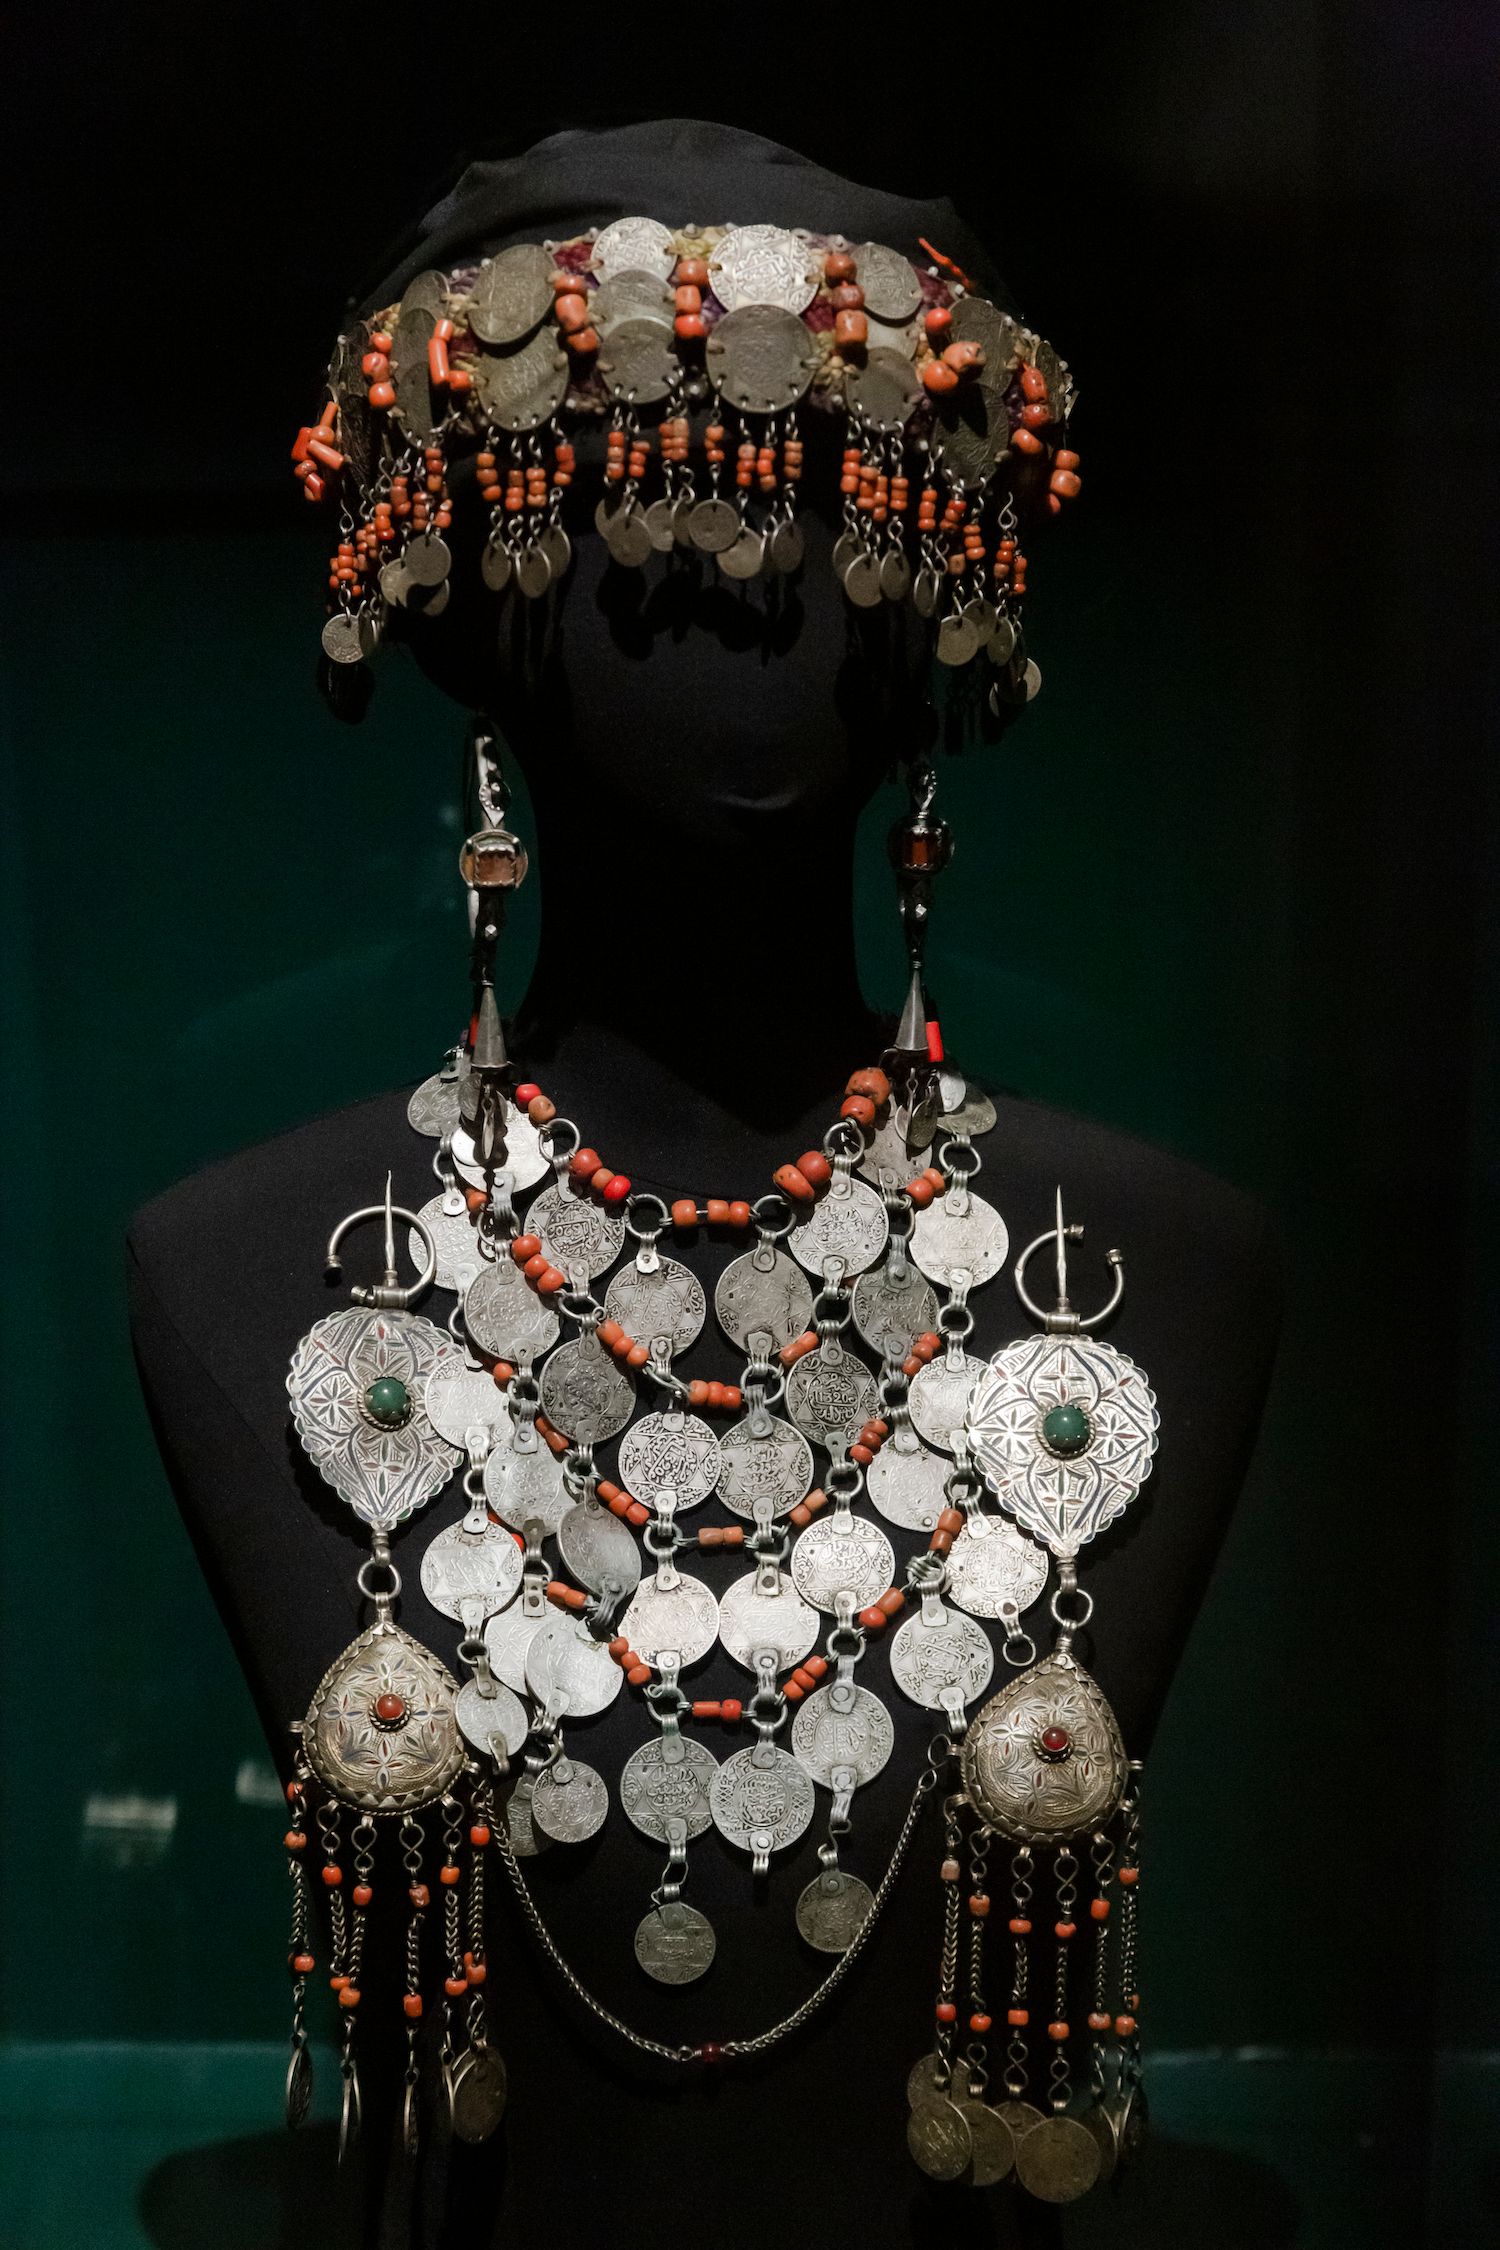 Morocco Night at the Museum Doha - Berber Jewellery Exhibition